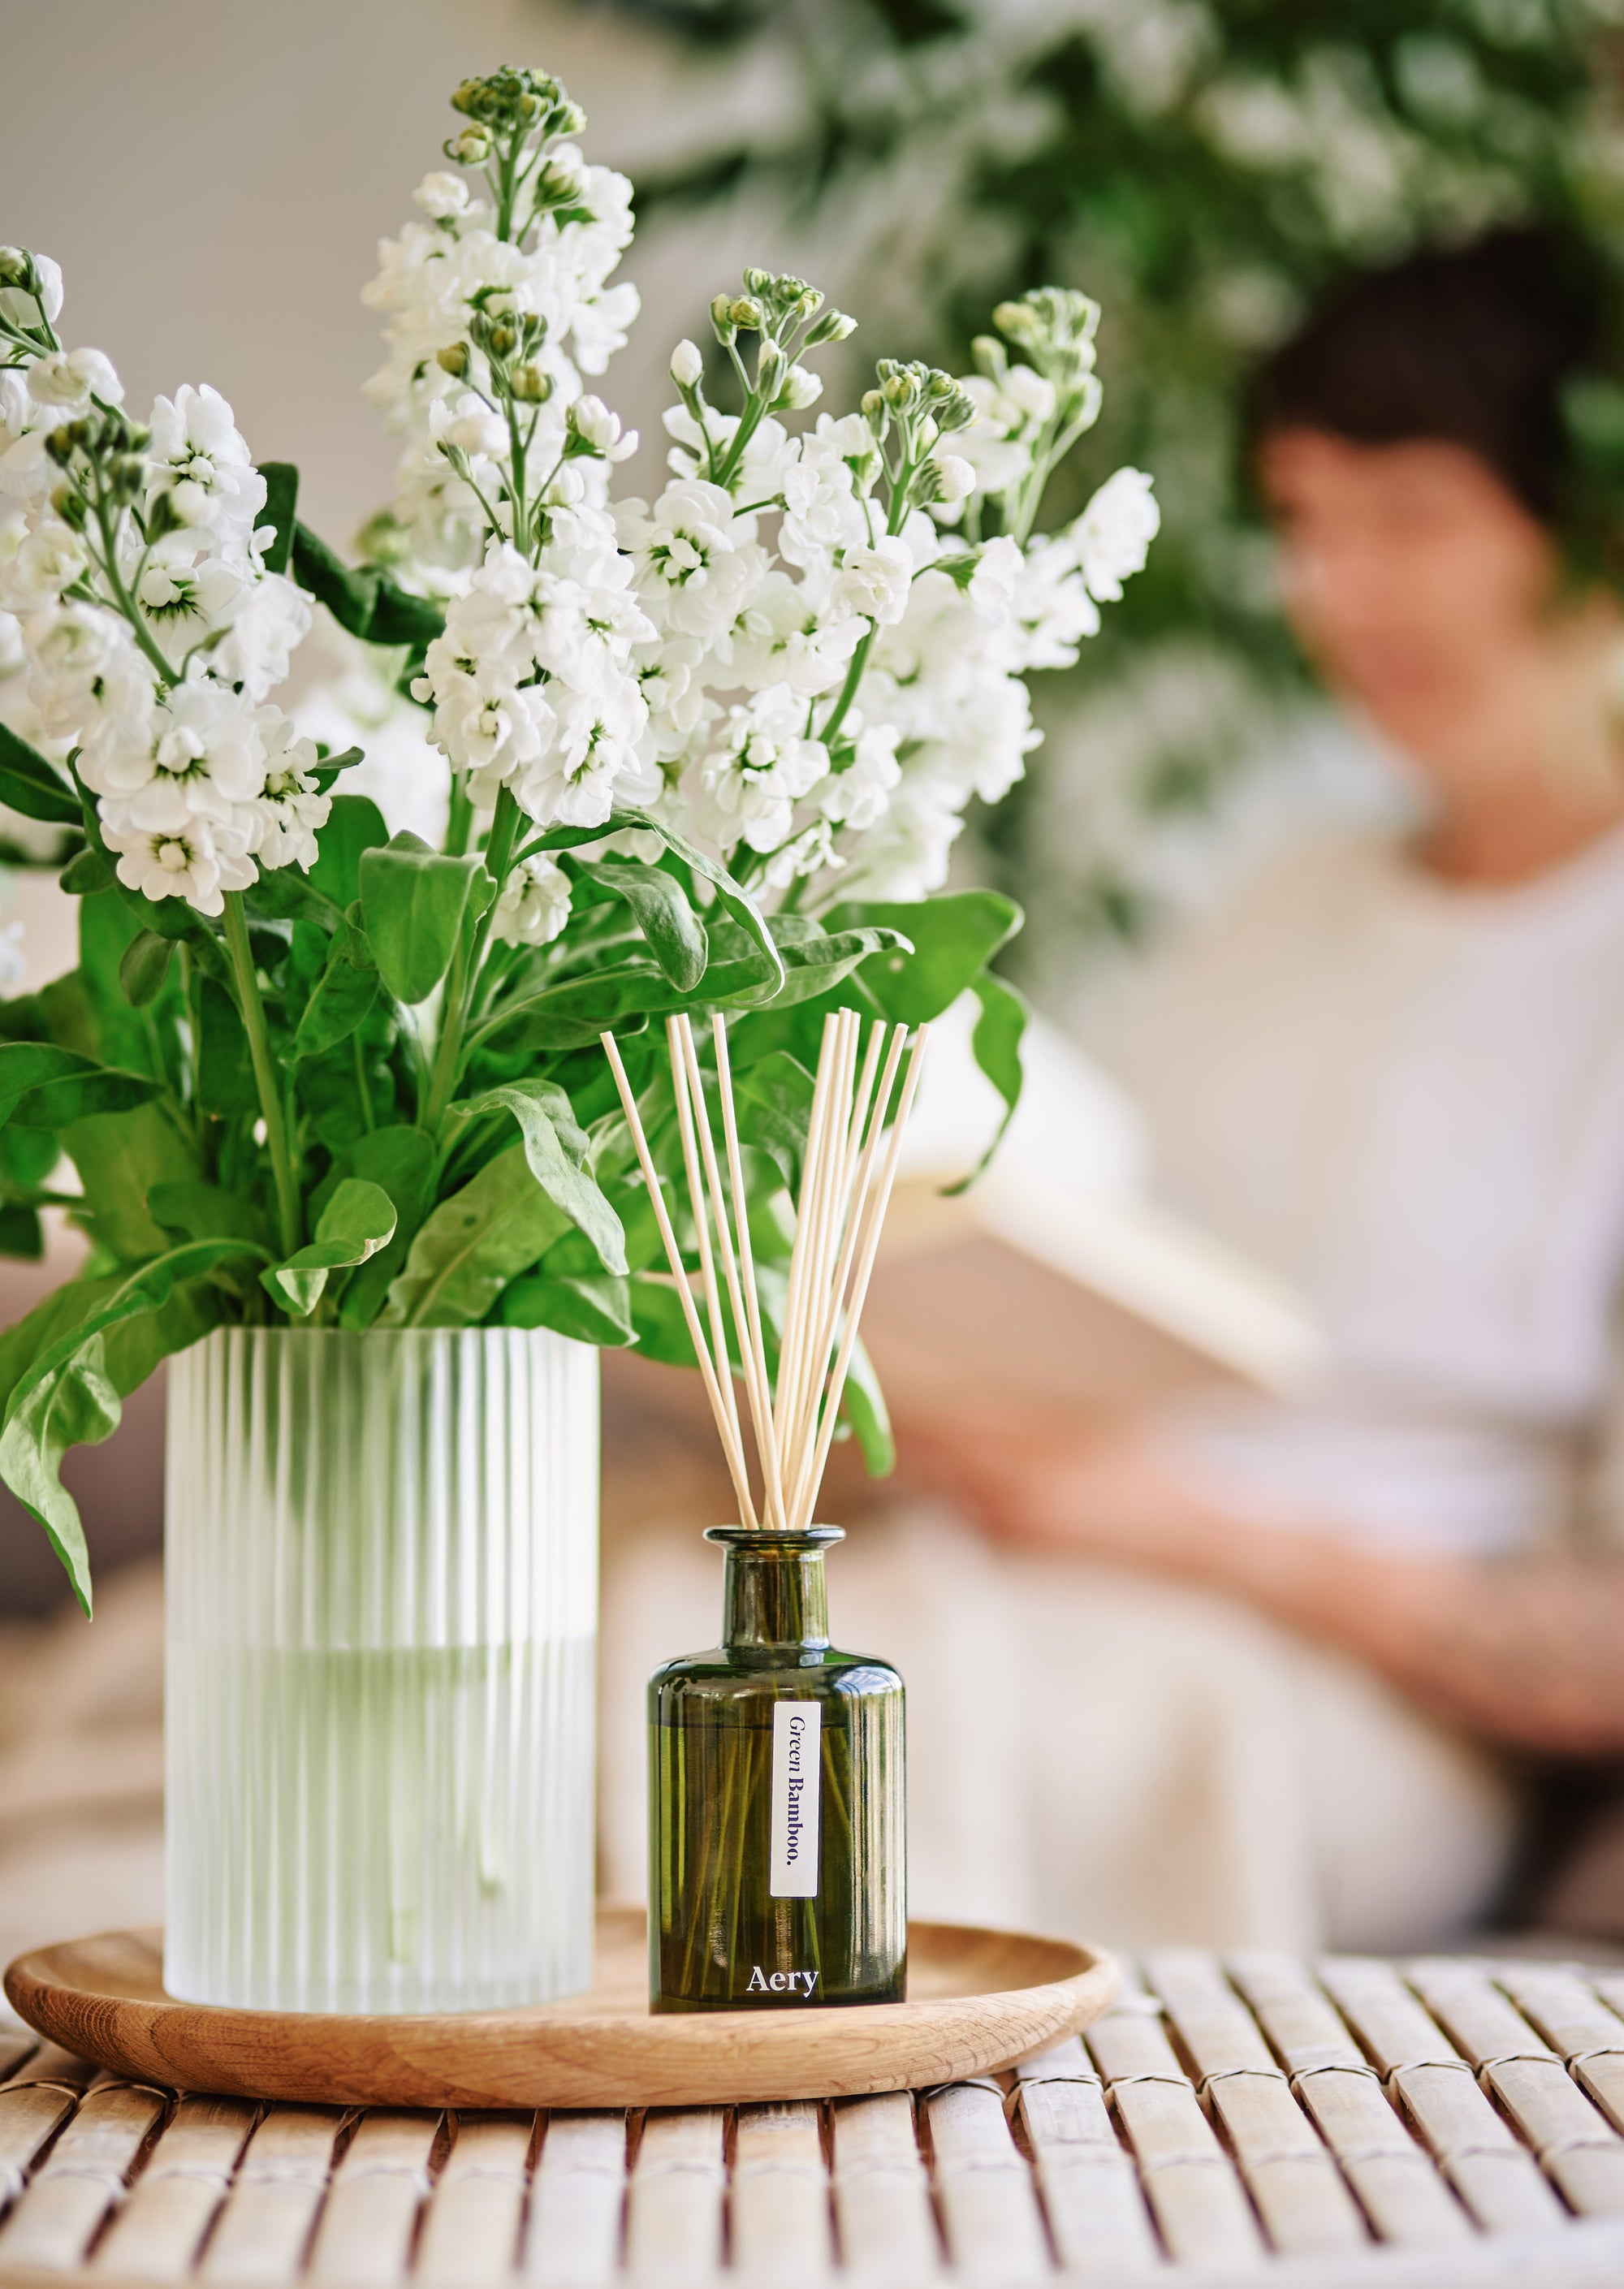 coffee table setting with tray and vase of white flowers next to an aery living reed diffuser in foreground and person sitting reading in the background 